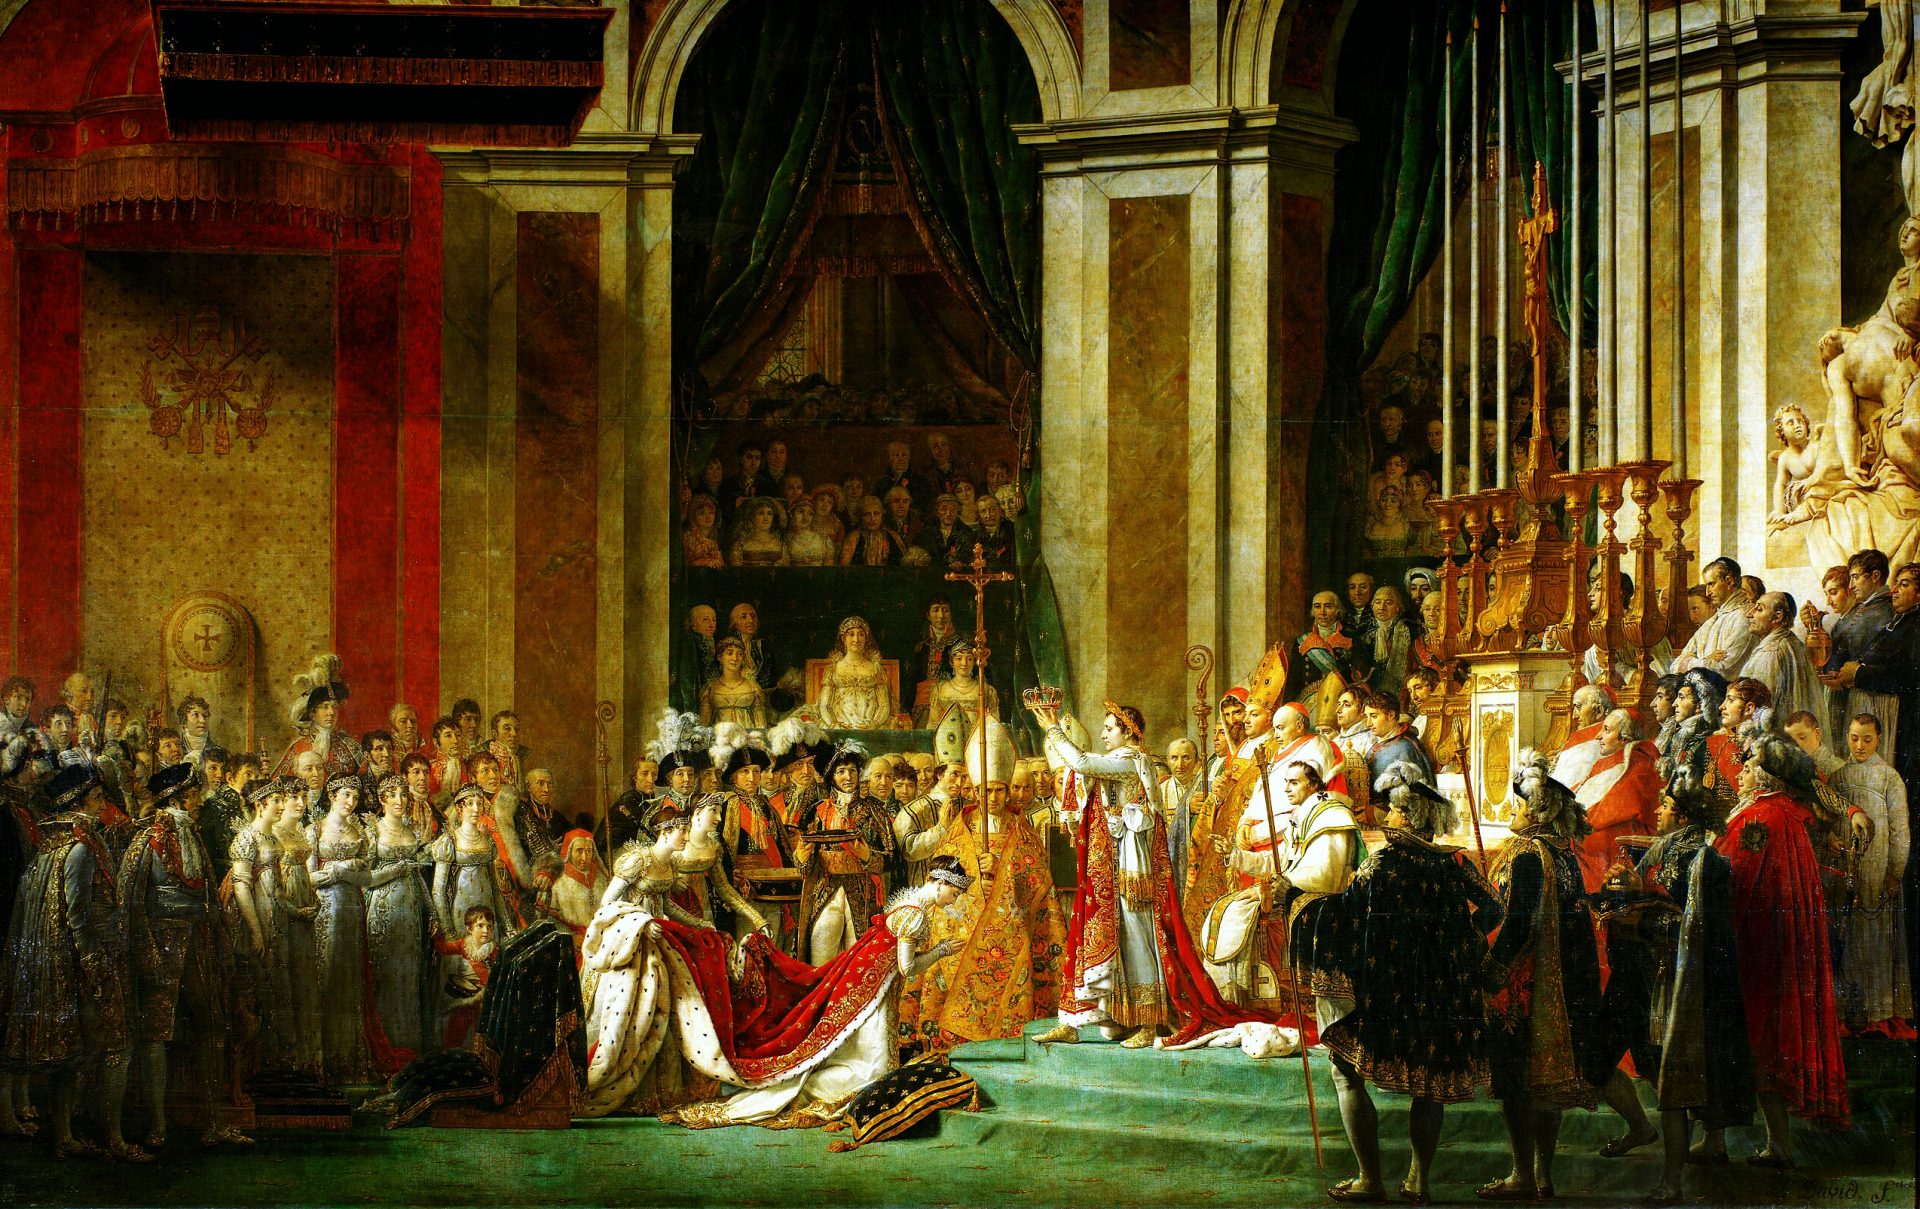 Lavish painting depicting the coronation ceremony of Emperor Napoleon I and Empress Josephine inside Notre-Dame de Paris on December 2, 1804. Napoleon, in regal attire, raises a crown above his head, preparing to crown himself, while Josephine kneels gracefully before him in a sumptuous white gown and flowing train. A vast assembly of dignitaries, clergy, and attendees bear witness, positioned within the grand architectural setting of the cathedral, adorned with rich draperies and architectural details.